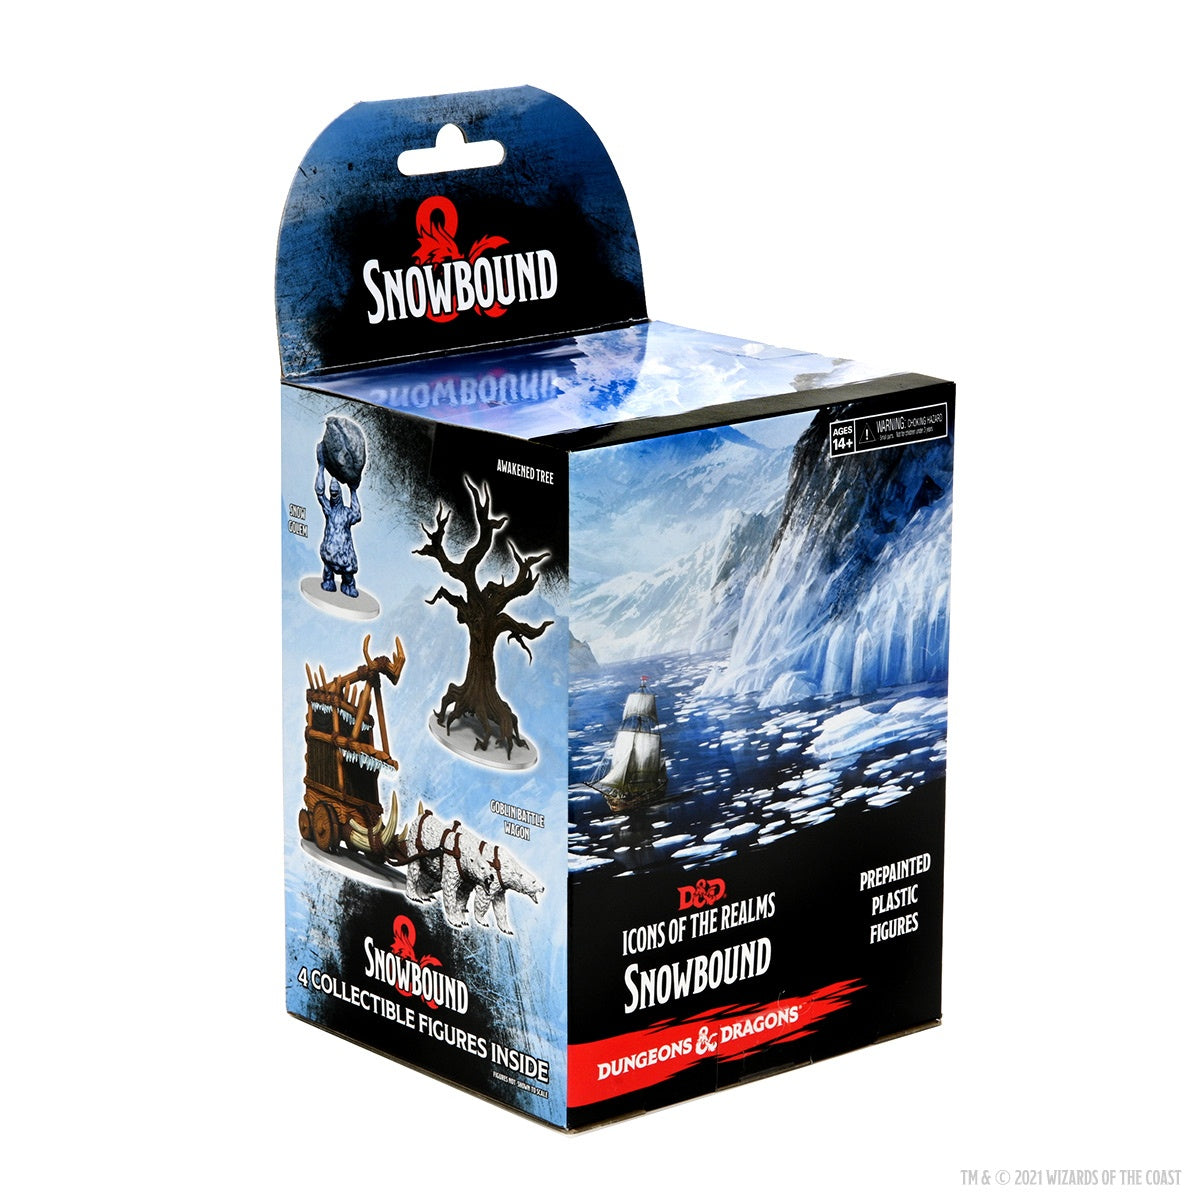 DUNGEONS & DRAGONS ICONS OF THE REALM SNOWBOUND BOOSTER BOX